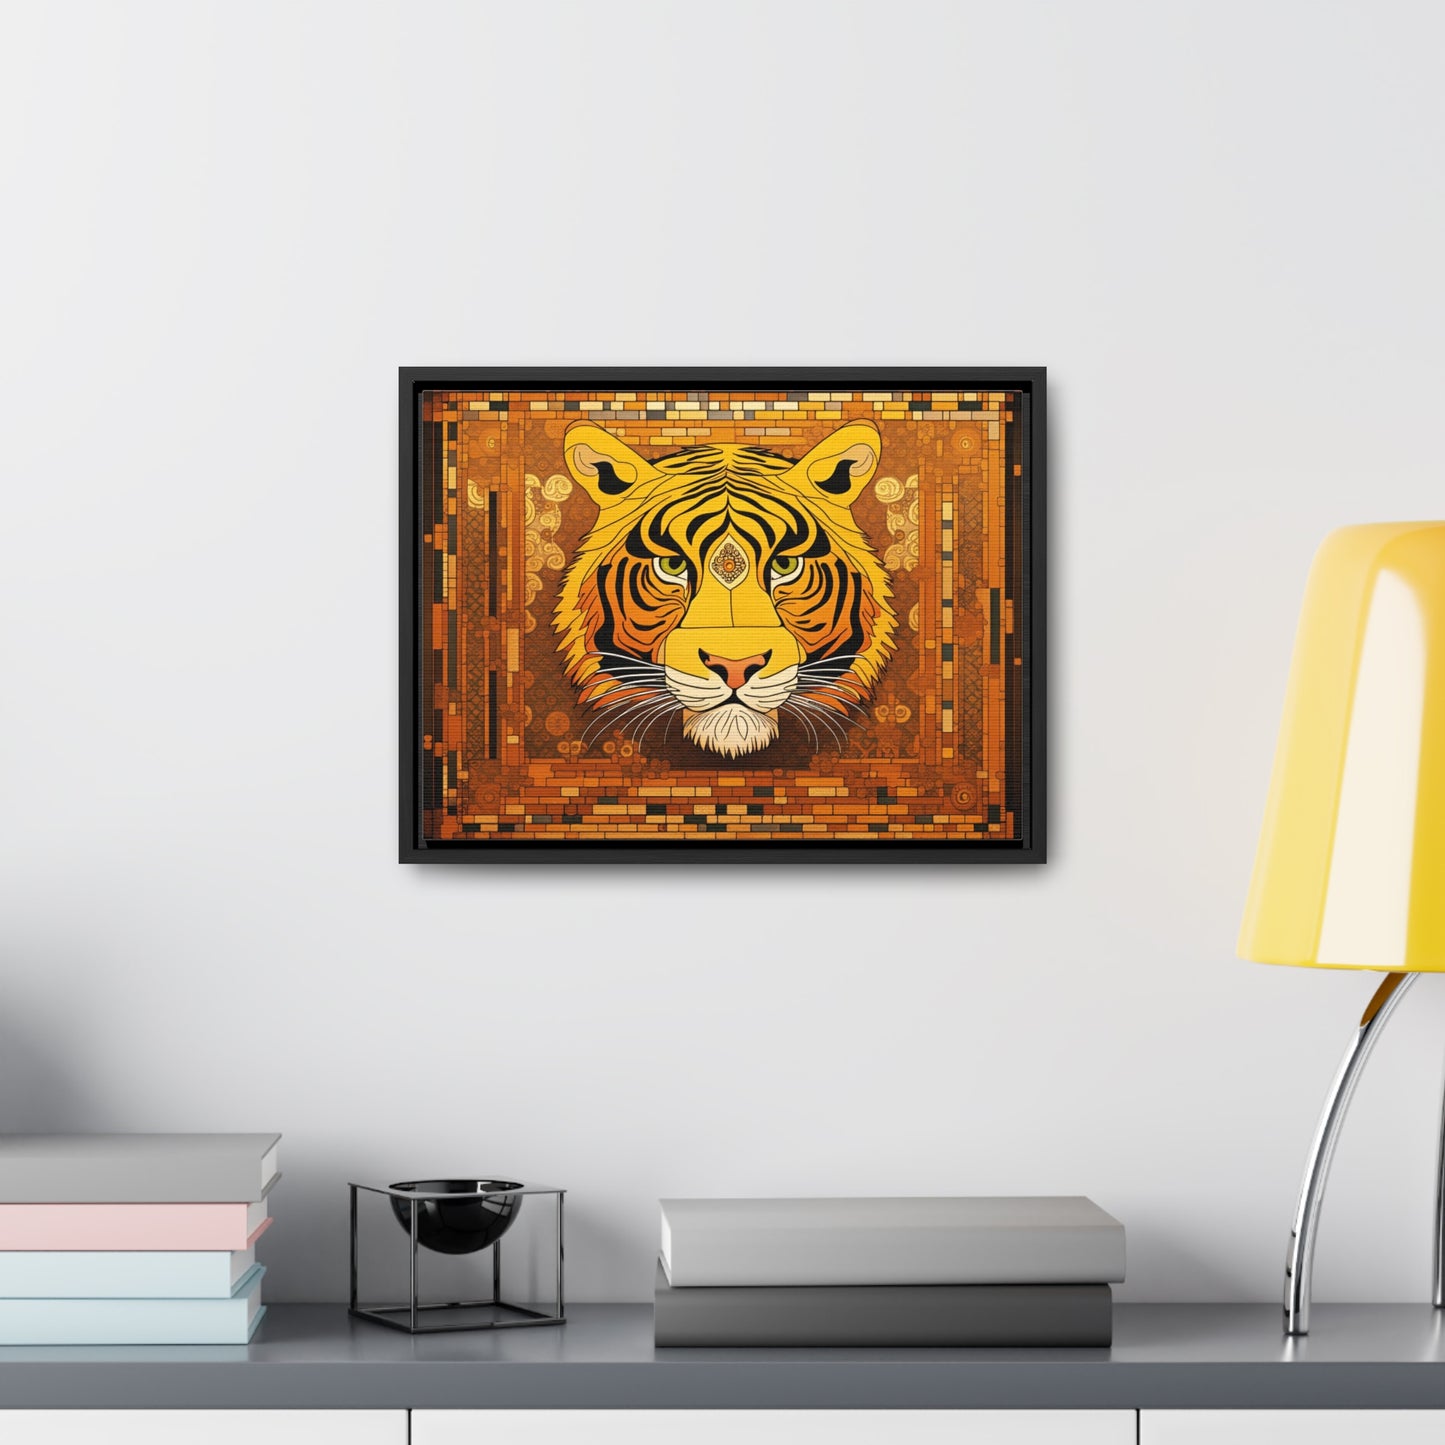 Tiger Head in the Style of Gustav Klimt Print on Canvas in a Floating Frame 16x12 hung